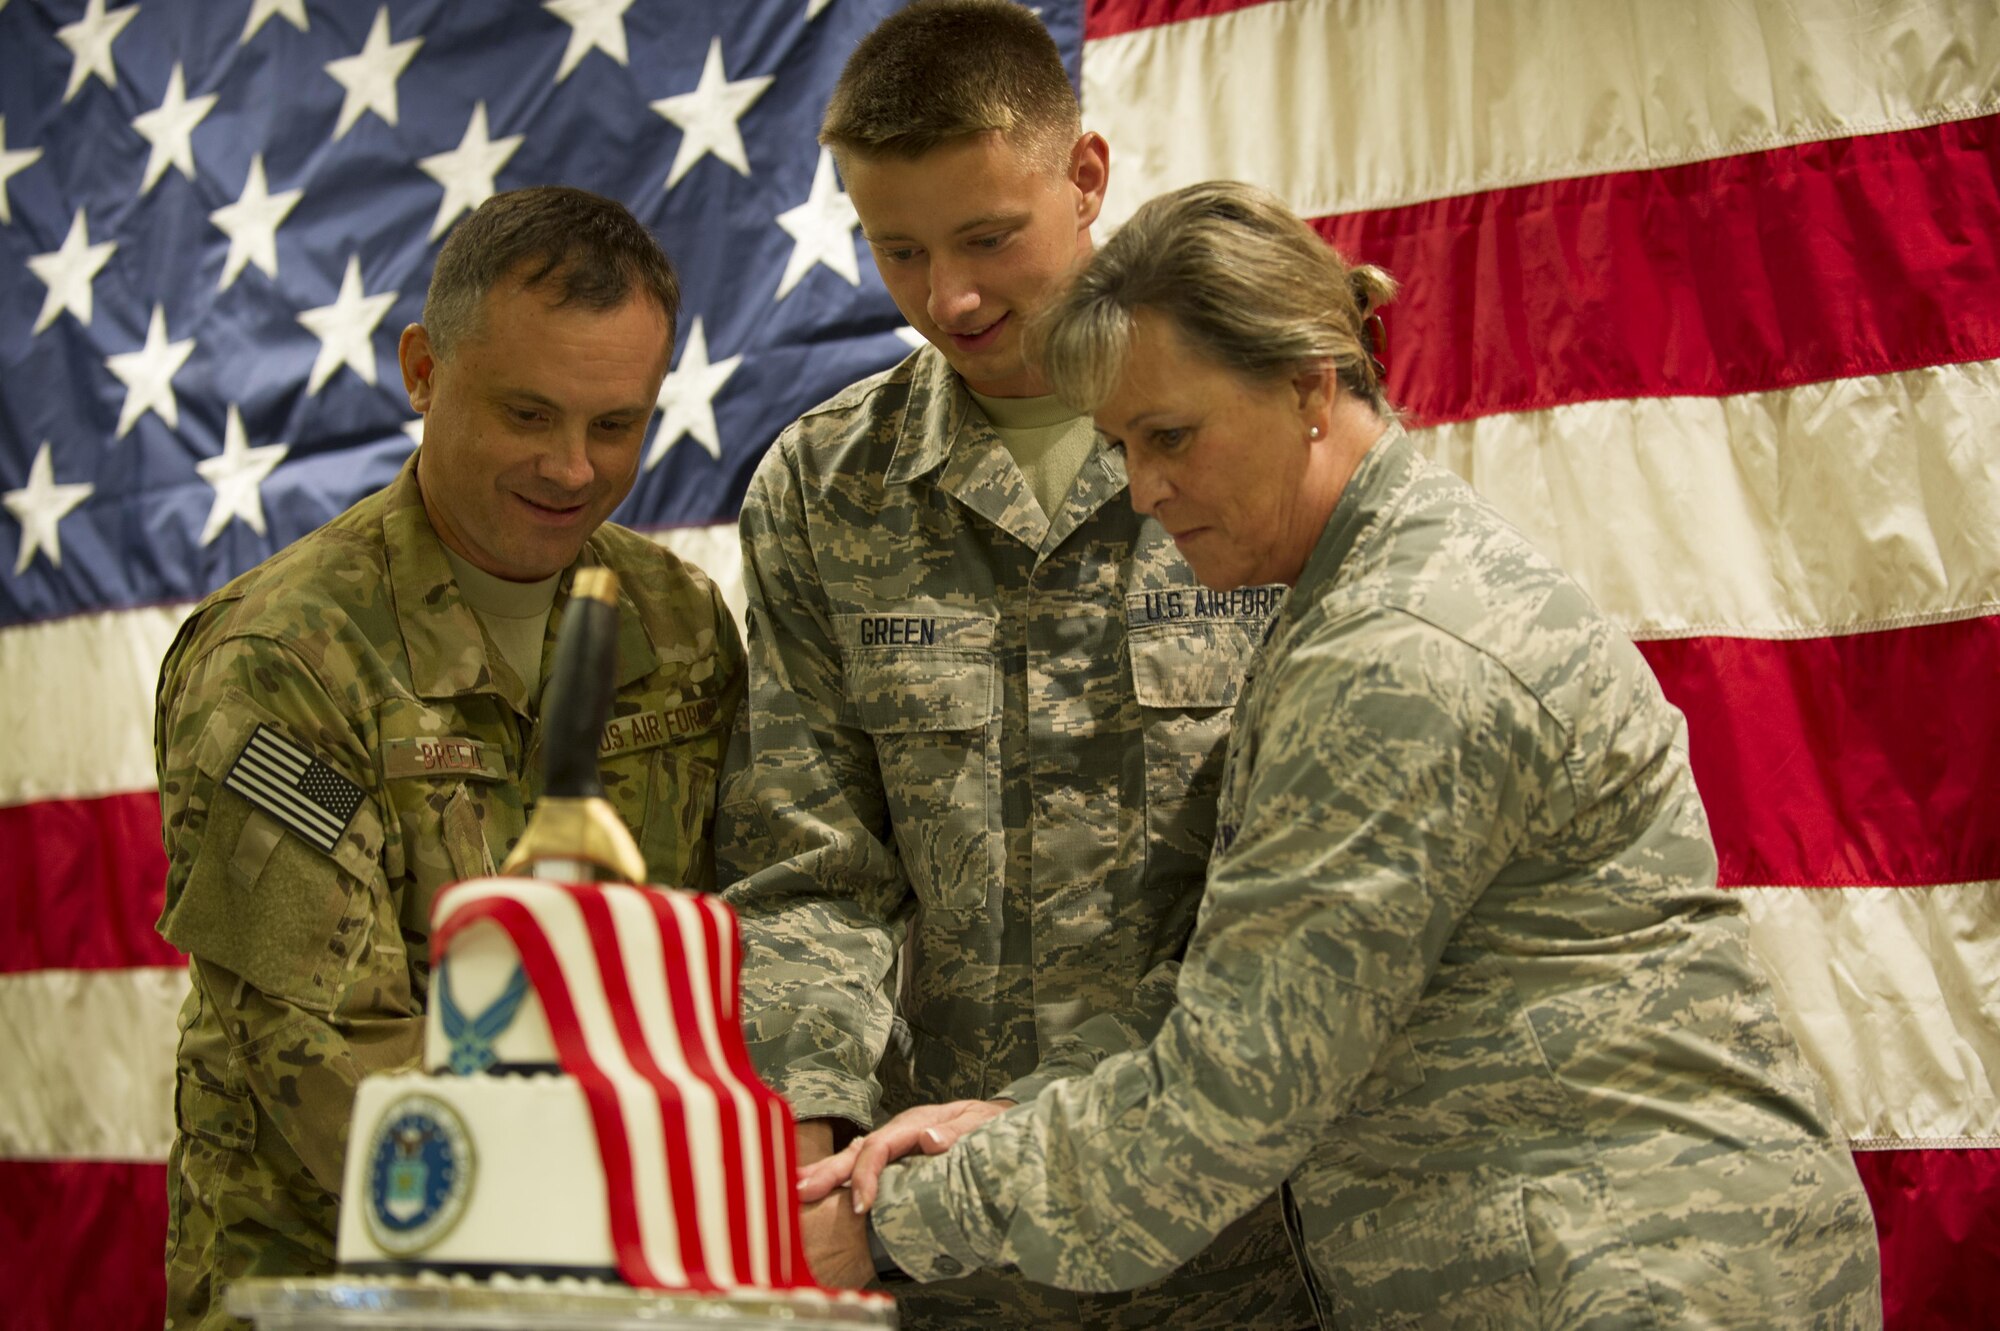 Col. Steven Breeze, vice commander of the 1st Special Operations Wing, and Airman 1st Class Wyatt Green, a vehicle operator with the 1st Special Operations Logistics Readiness Squadron, and Lt. Col. Deborah McCall, Health Care Intergrater with the 1st Special Operations Medical Group, cut a cake celebrating the Air Force’s 69th birthday at Hurlburt Field, Fla., Sept. 16, 2016.. The official birthday of the U.S. Air Force is Sept. 18, 1947. (U.S. Air Force photo by Airman 1st Class Isaac O. Guest IV)